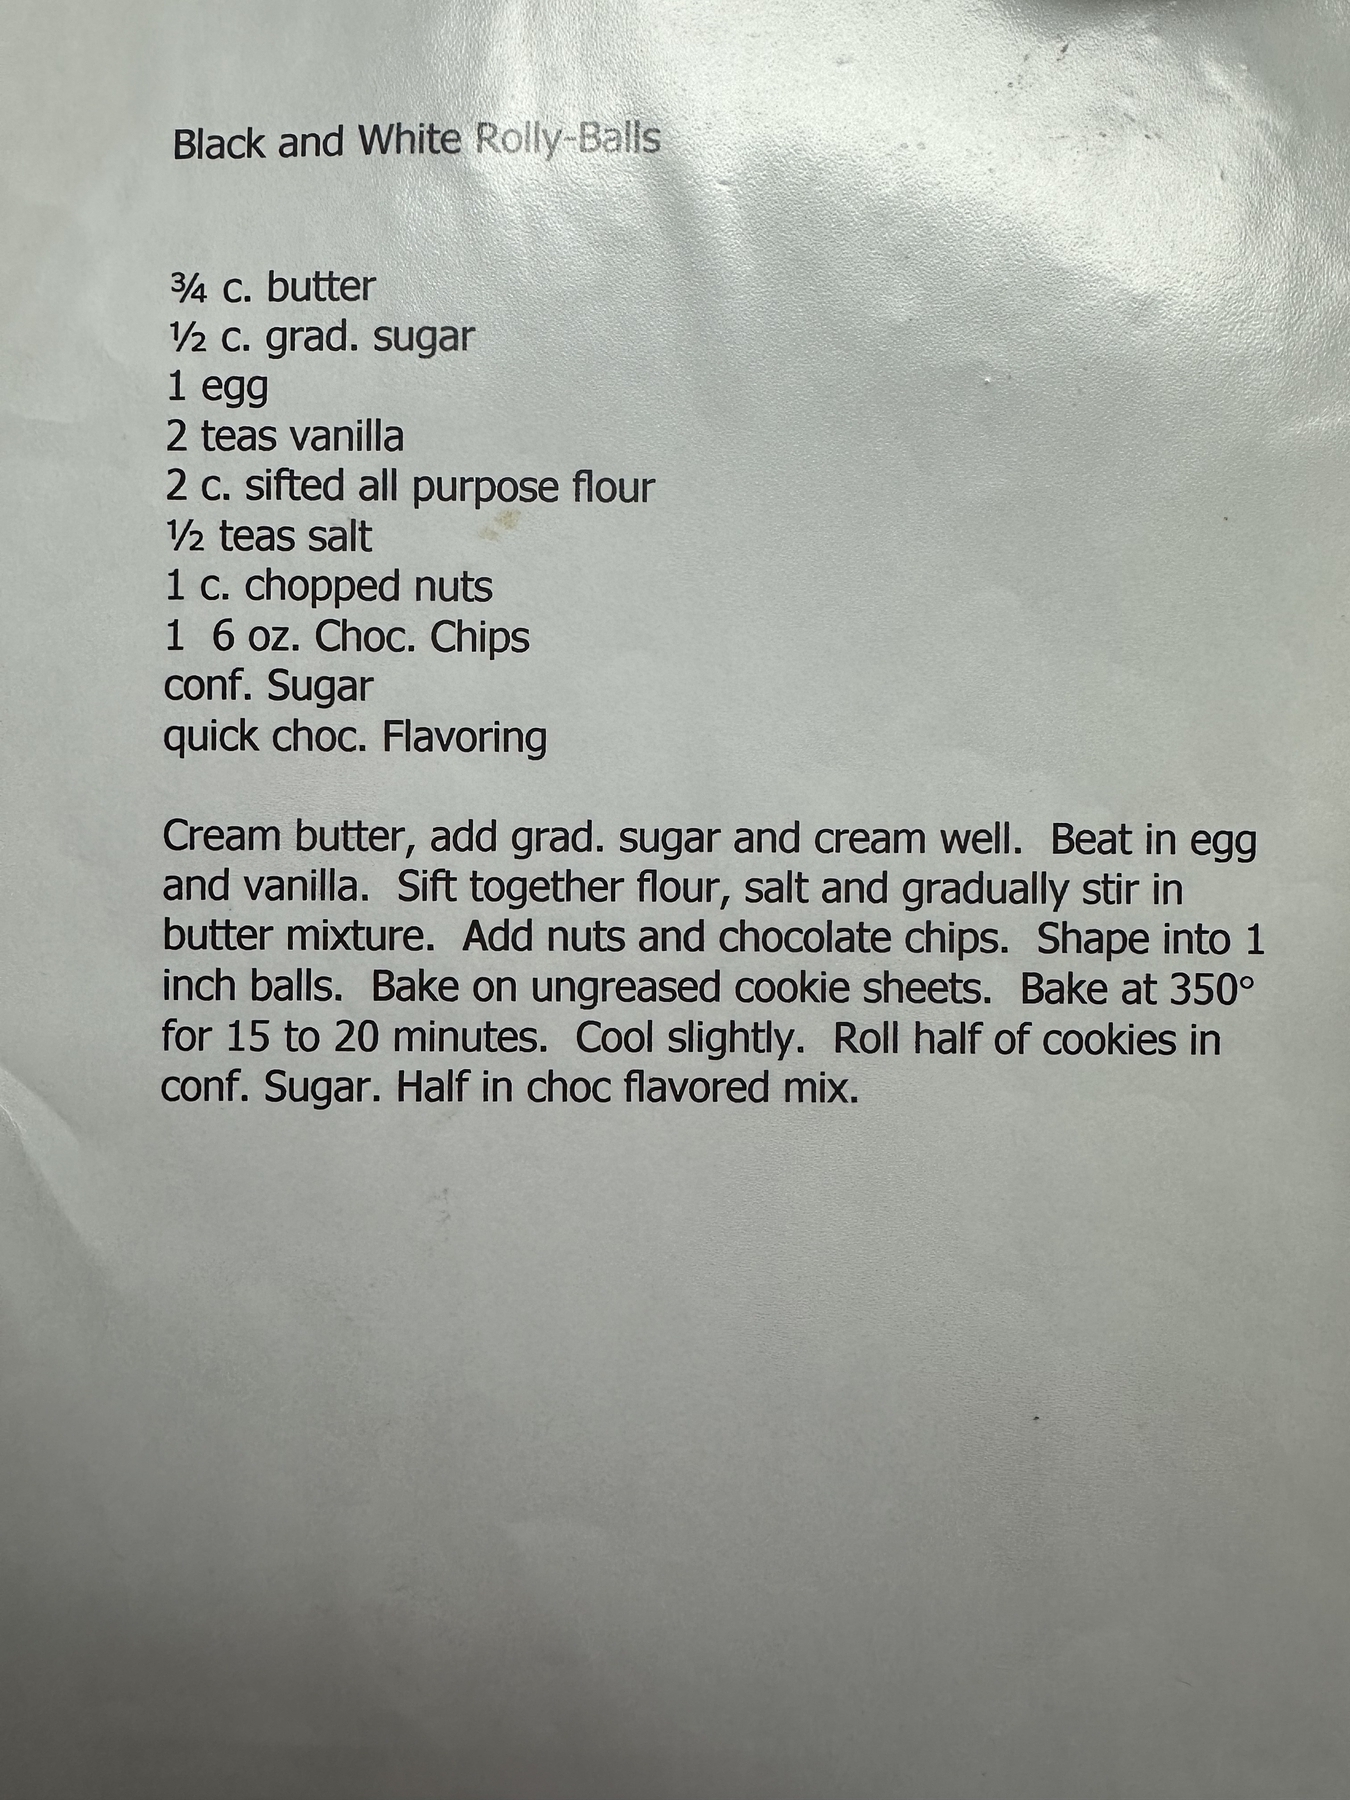 Family recipe for these cookies. Will properly post soon